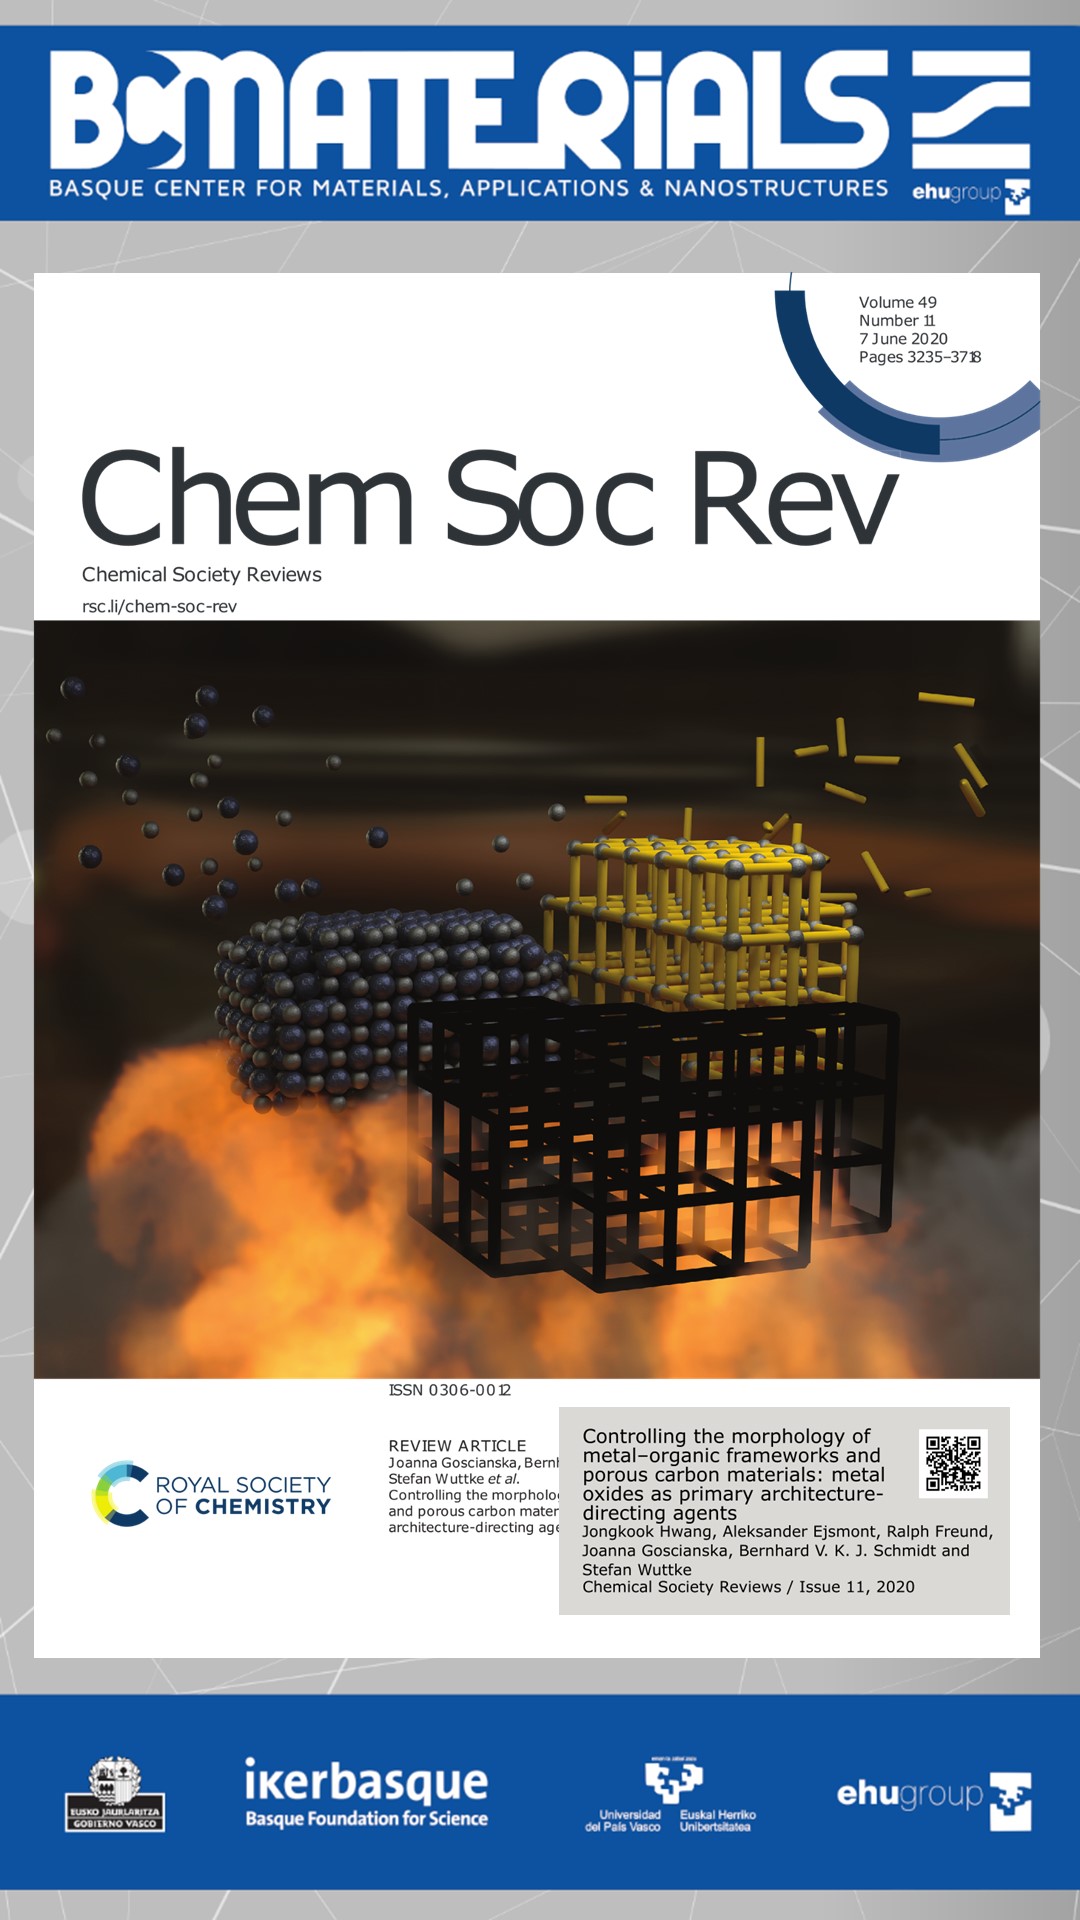 New cover on Chemical Society Reviews